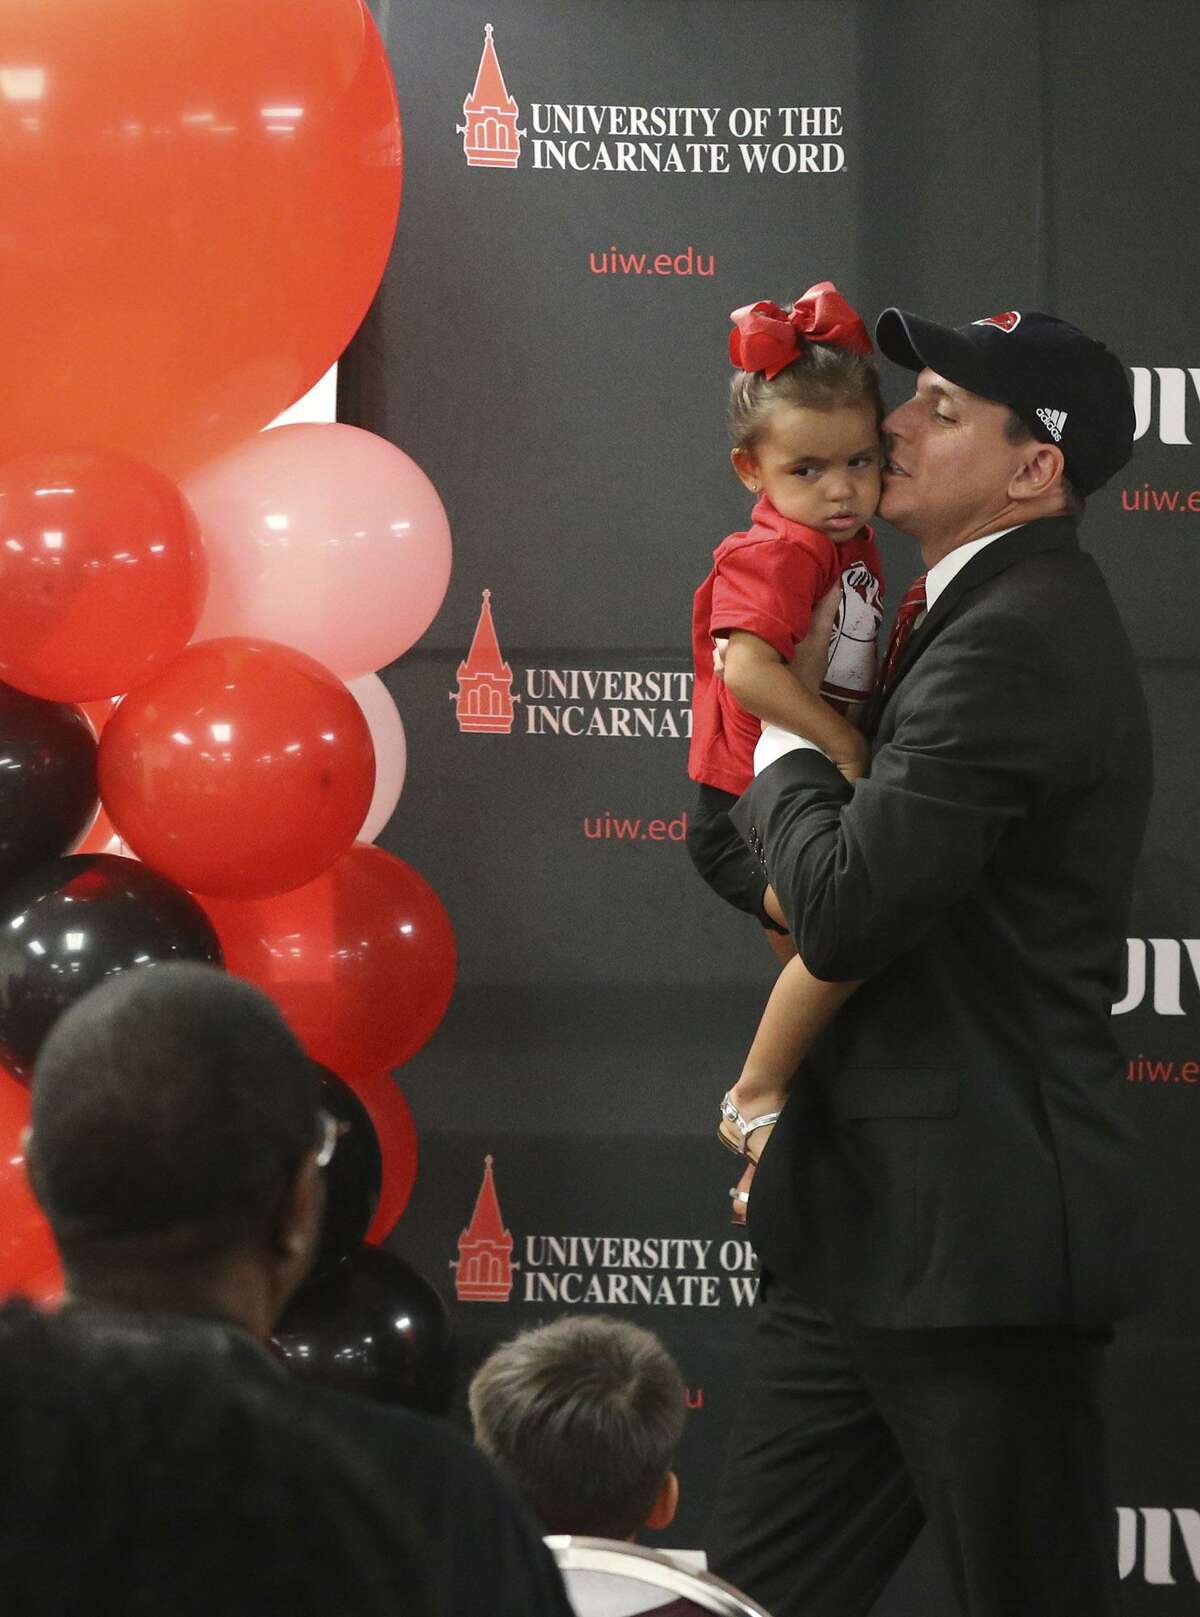 Brian Wickstrom (right) picks up his two-year-old-daughter Bricelle after it was announced Wednesday August 16, 2017 that he has become the University of the Incarnate Word’s new athletic director. Wickstrom joins UIW’s Cardinals after spending the last four years as director of athletics at the University of Louisiana Monroe. Wickstrom’s career spans nearly 20 years in collegiate athletics and has worked at Ohio University, the University of Missouri, Santa Clara University, the University of Michigan, the University of Texas at El Paso and the University of California, Riverside.